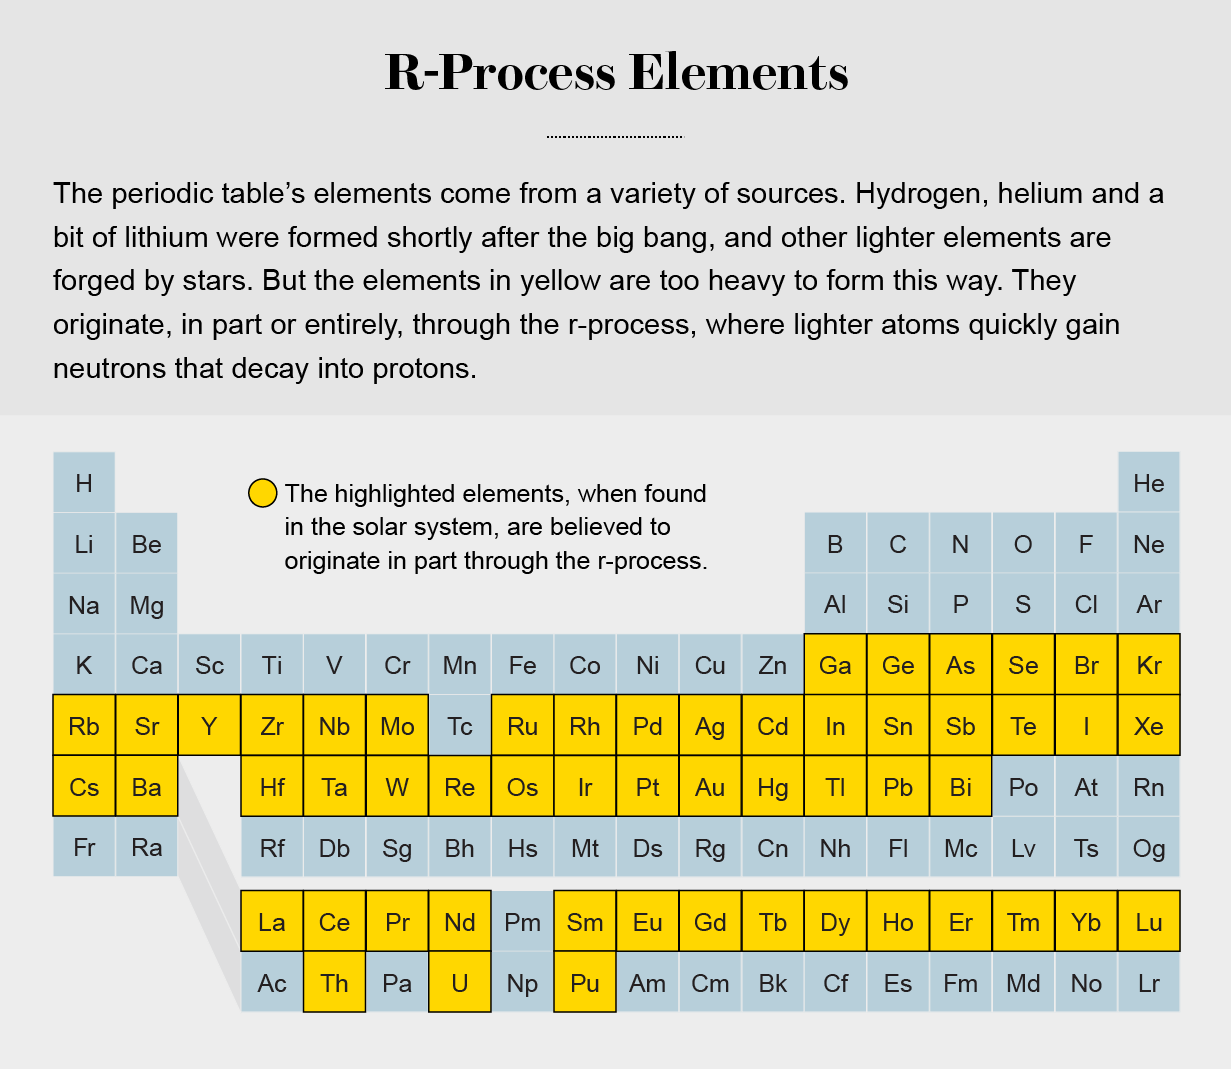 Periodic table highlights elements that originate, in part or entirely, through the r-process.